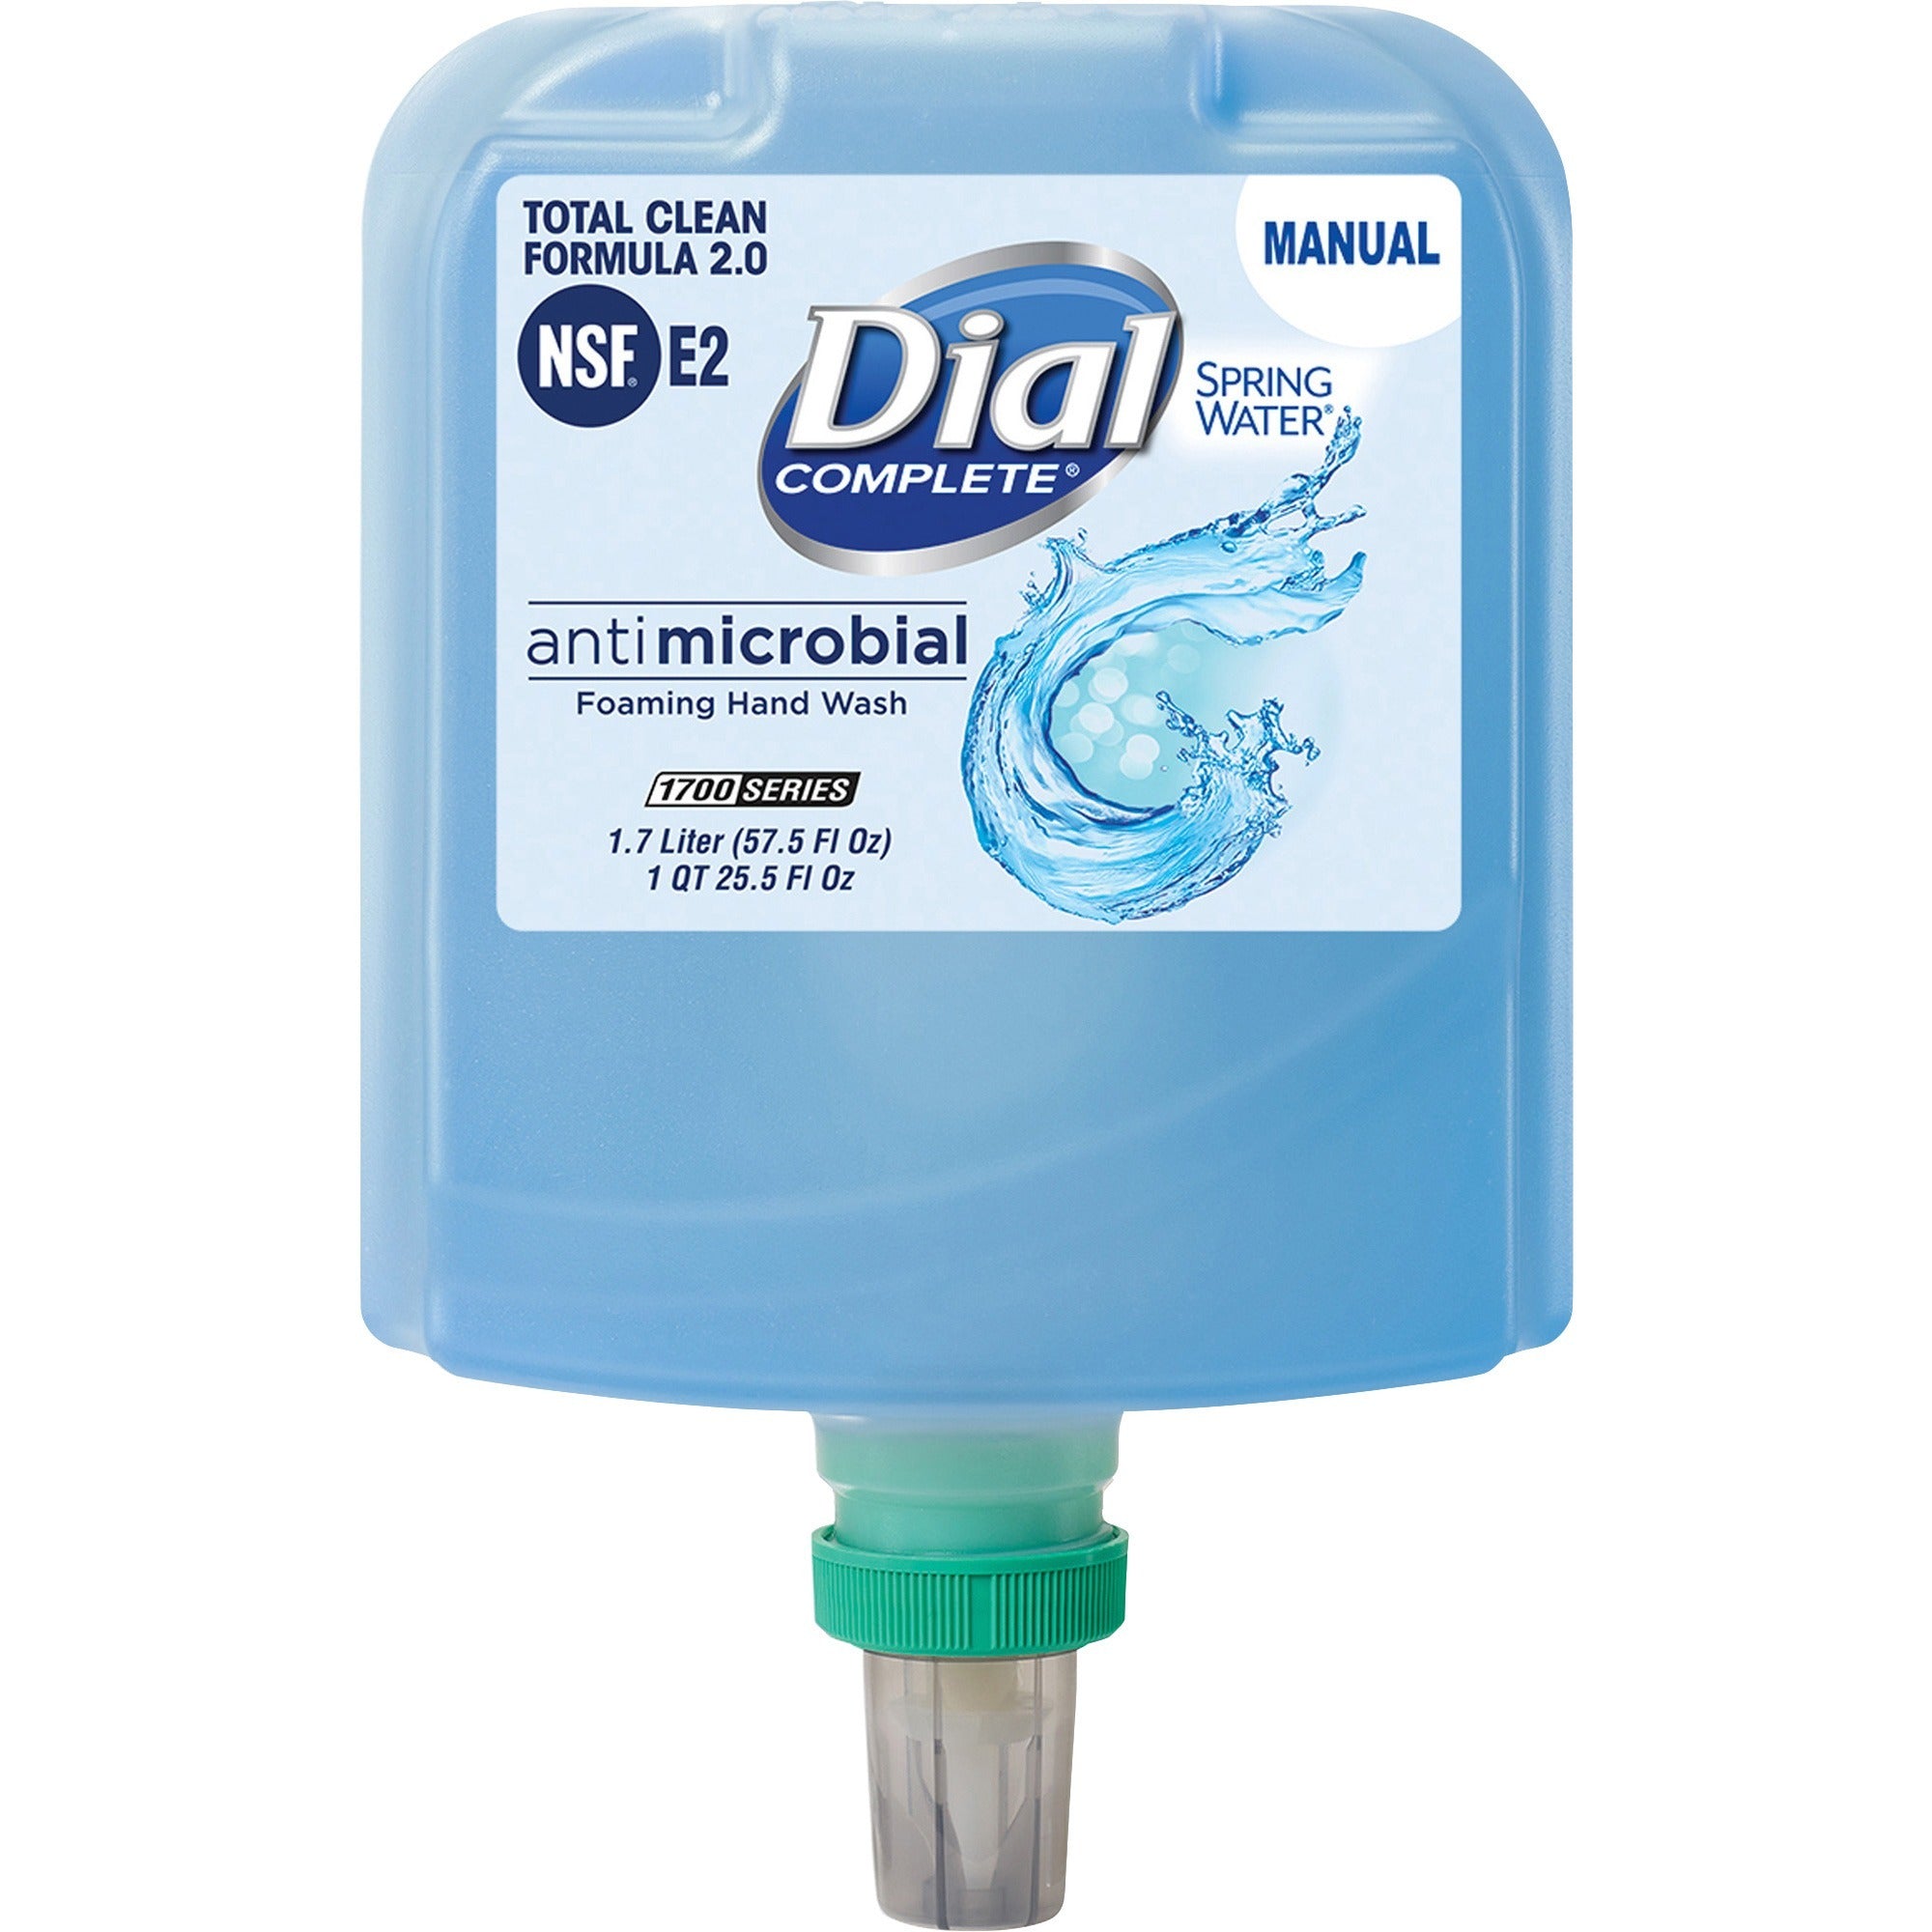 dial-complete-complete-antibacterial-foaming-hand-wash-refill-spring-water-scentfor-575-fl-oz-17005-ml-bacteria-remover-hand-healthcare-school-office-restaurant-daycare-moisturizing-antibacterial-blue-non-drying-3-carton_dia19690ct - 2